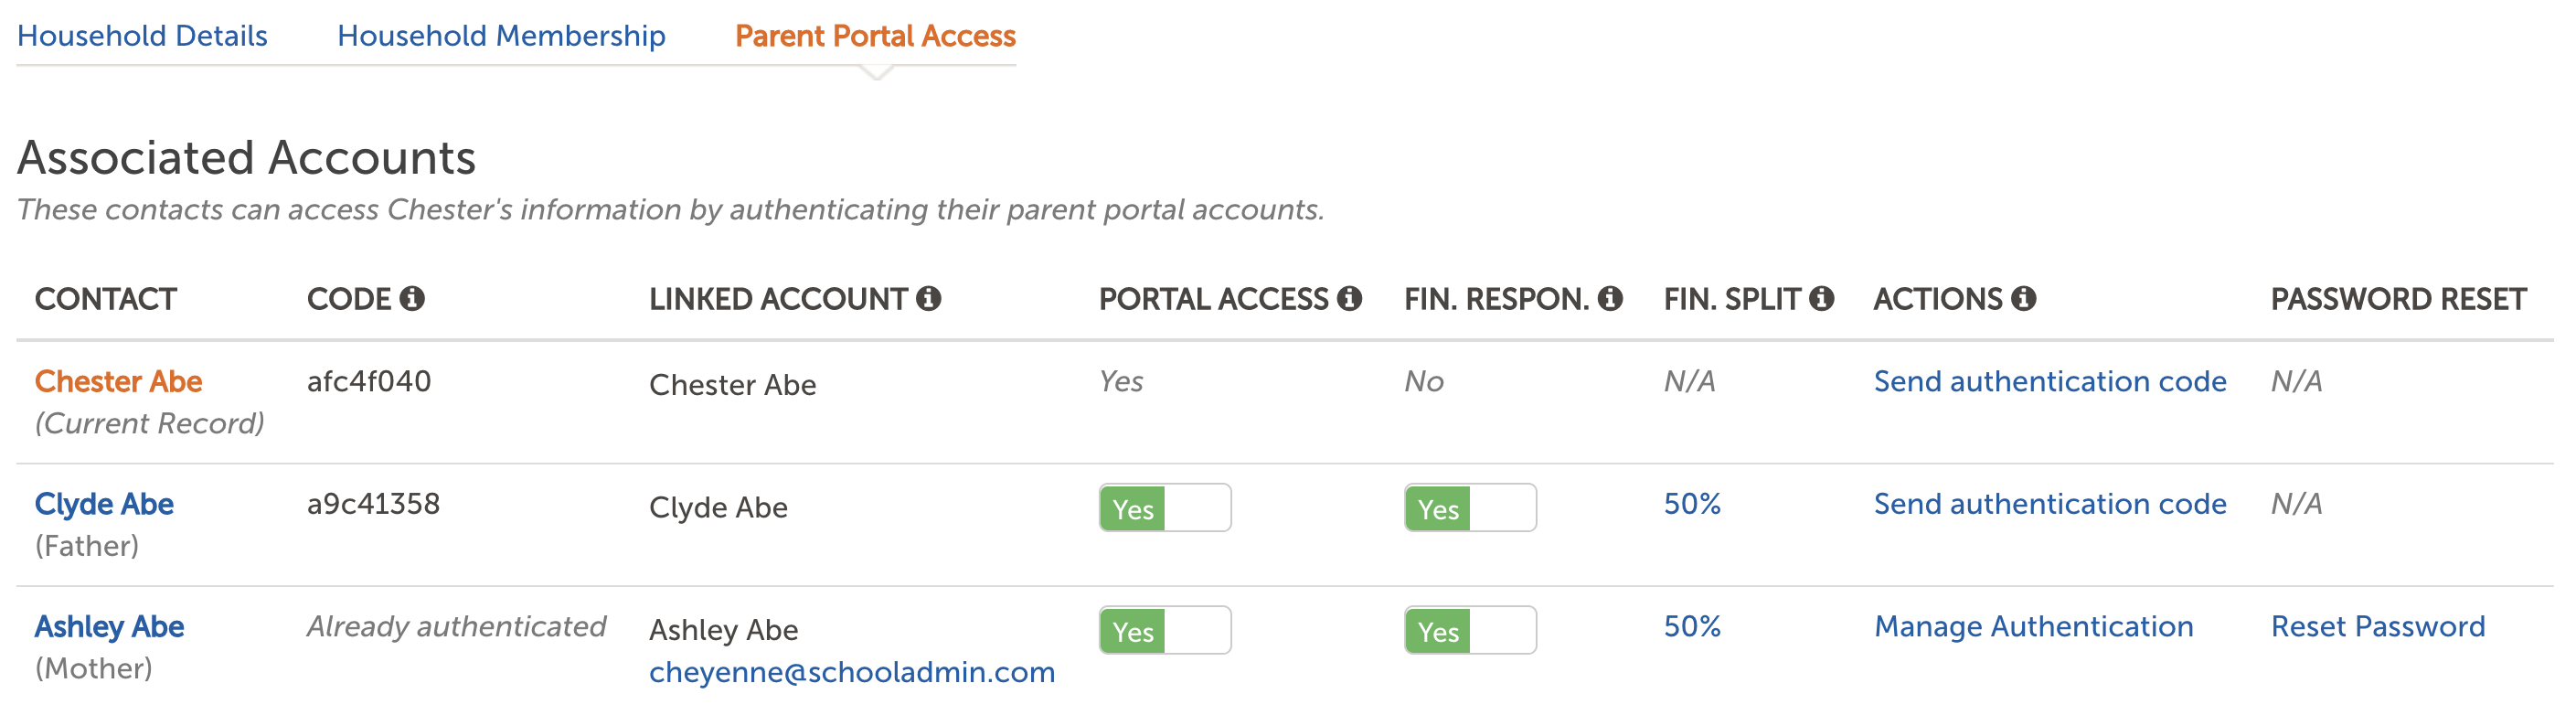 Image of the Parent Portal Access - Associated Accounts section of the contact record.